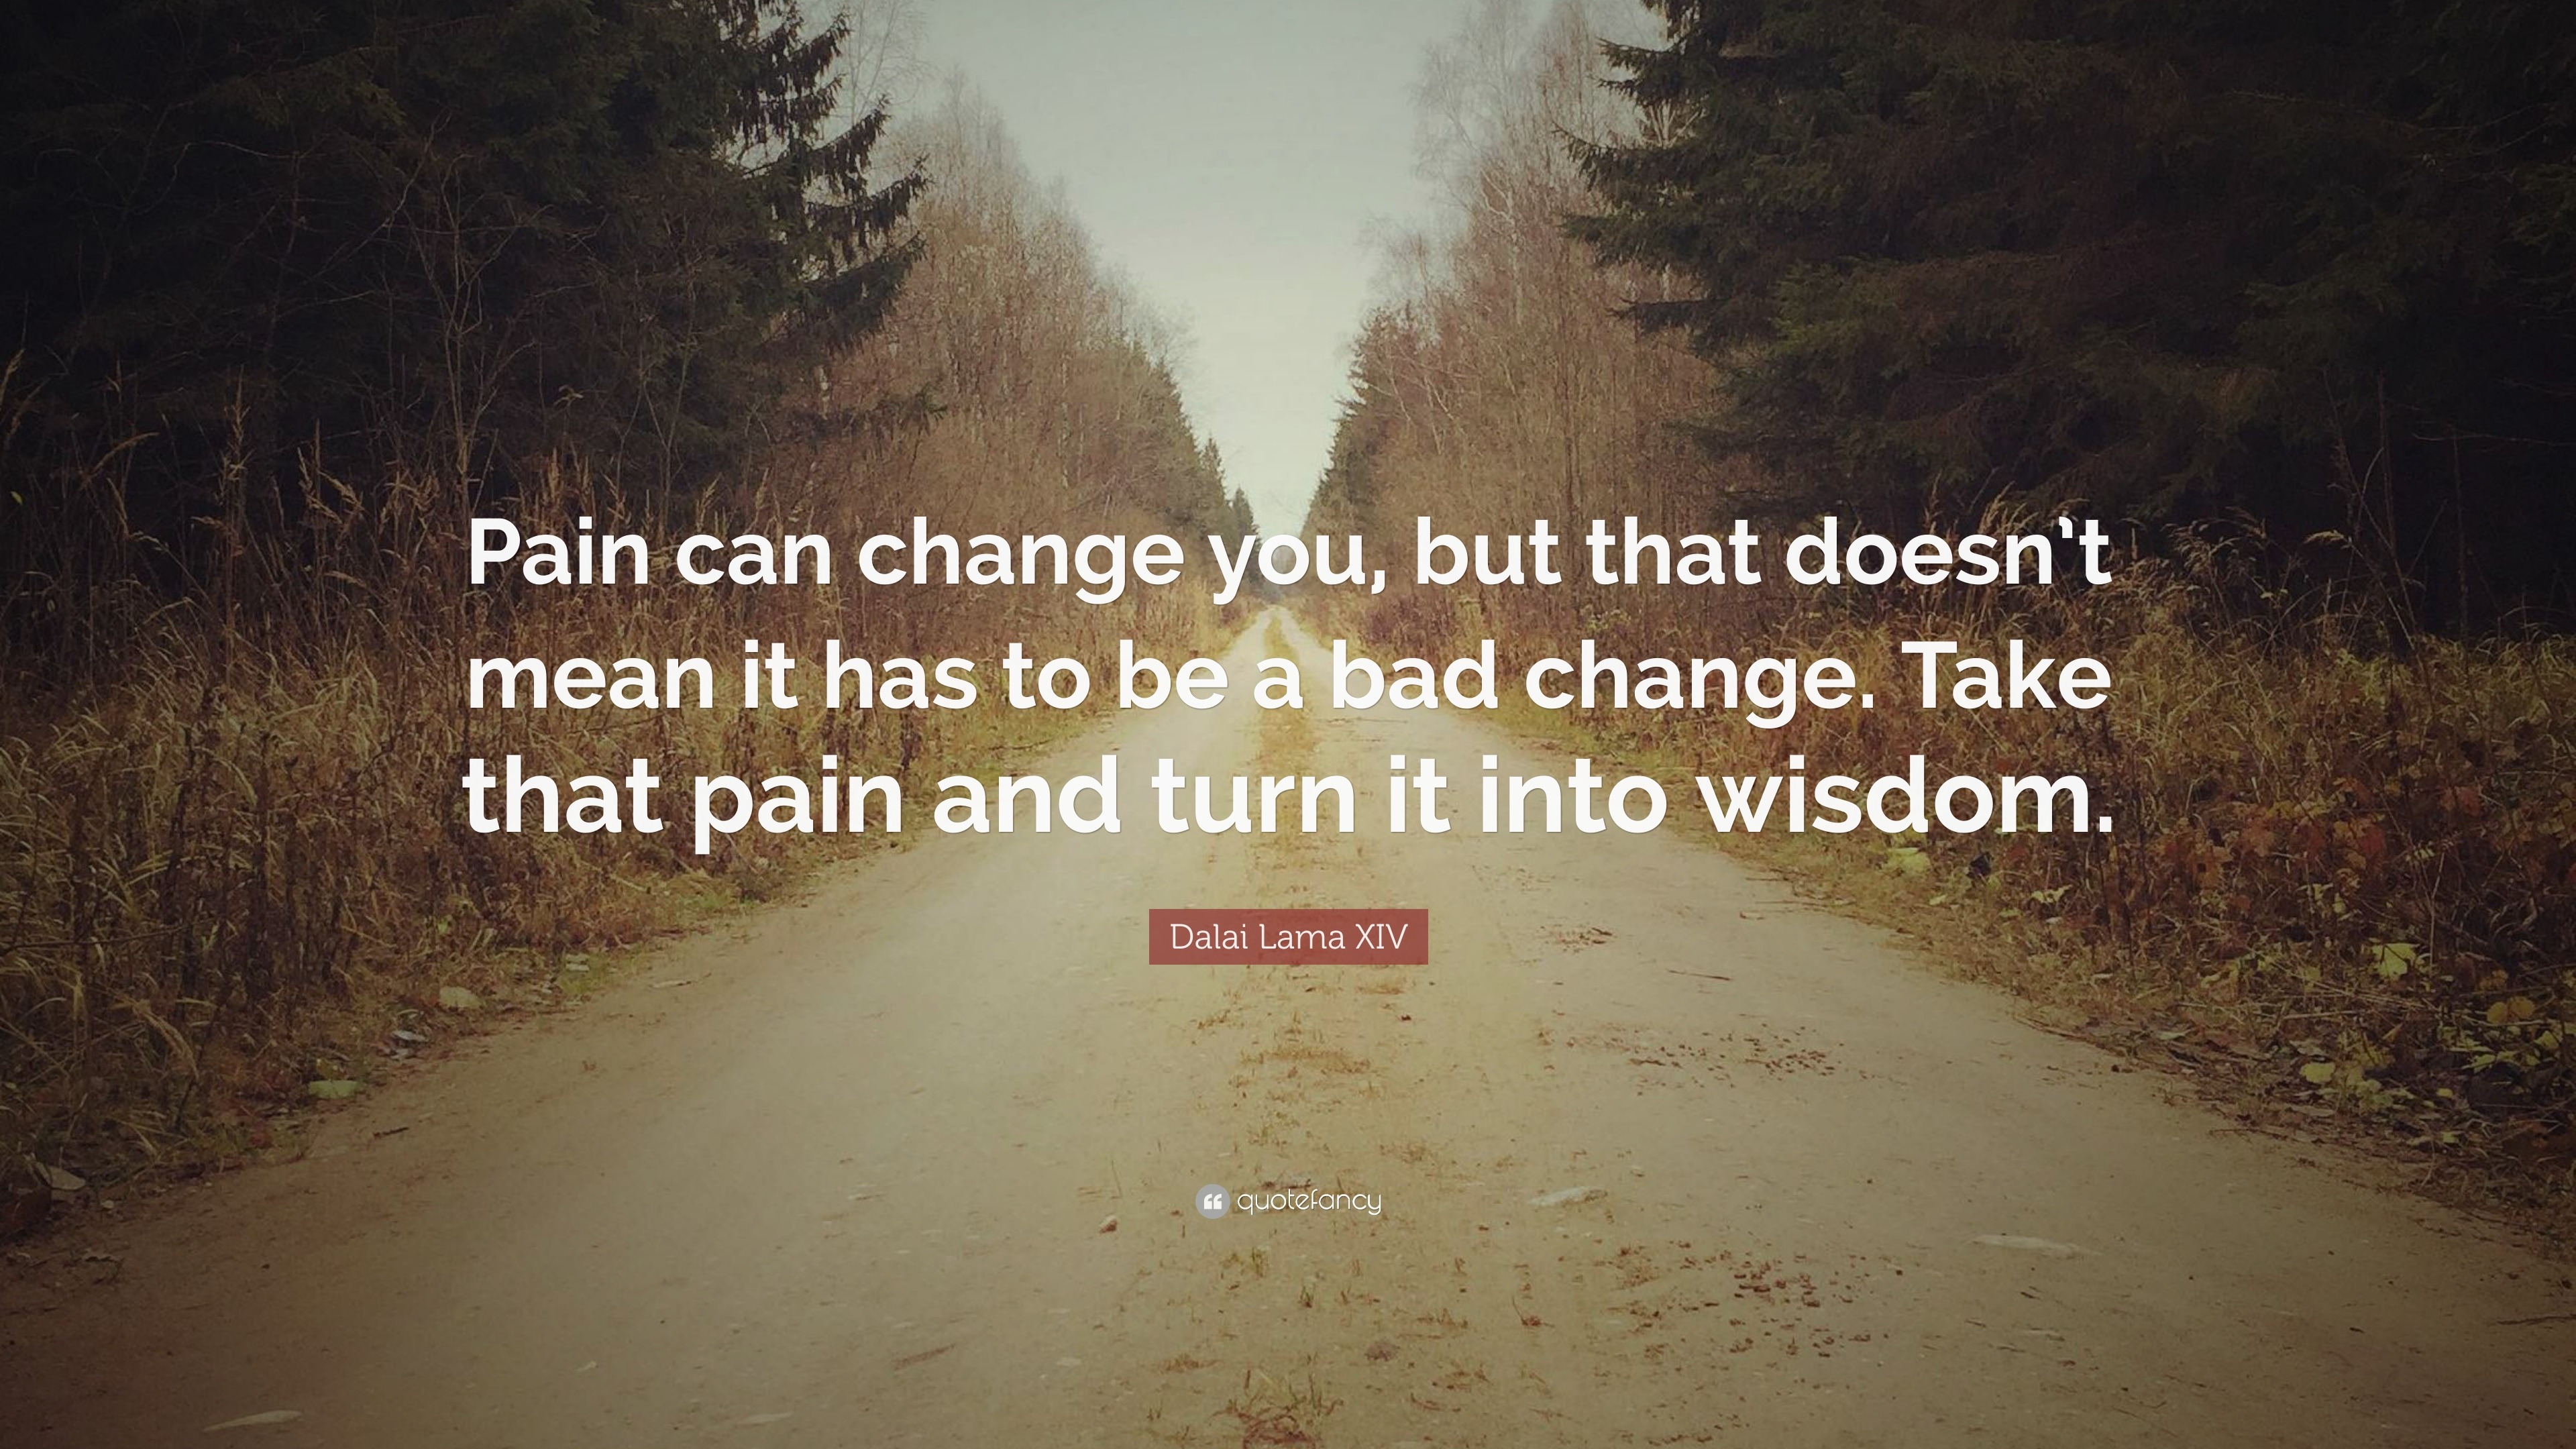 Dalai Lama XIV Quote: “Pain can change you, but that doesn’t mean it ...